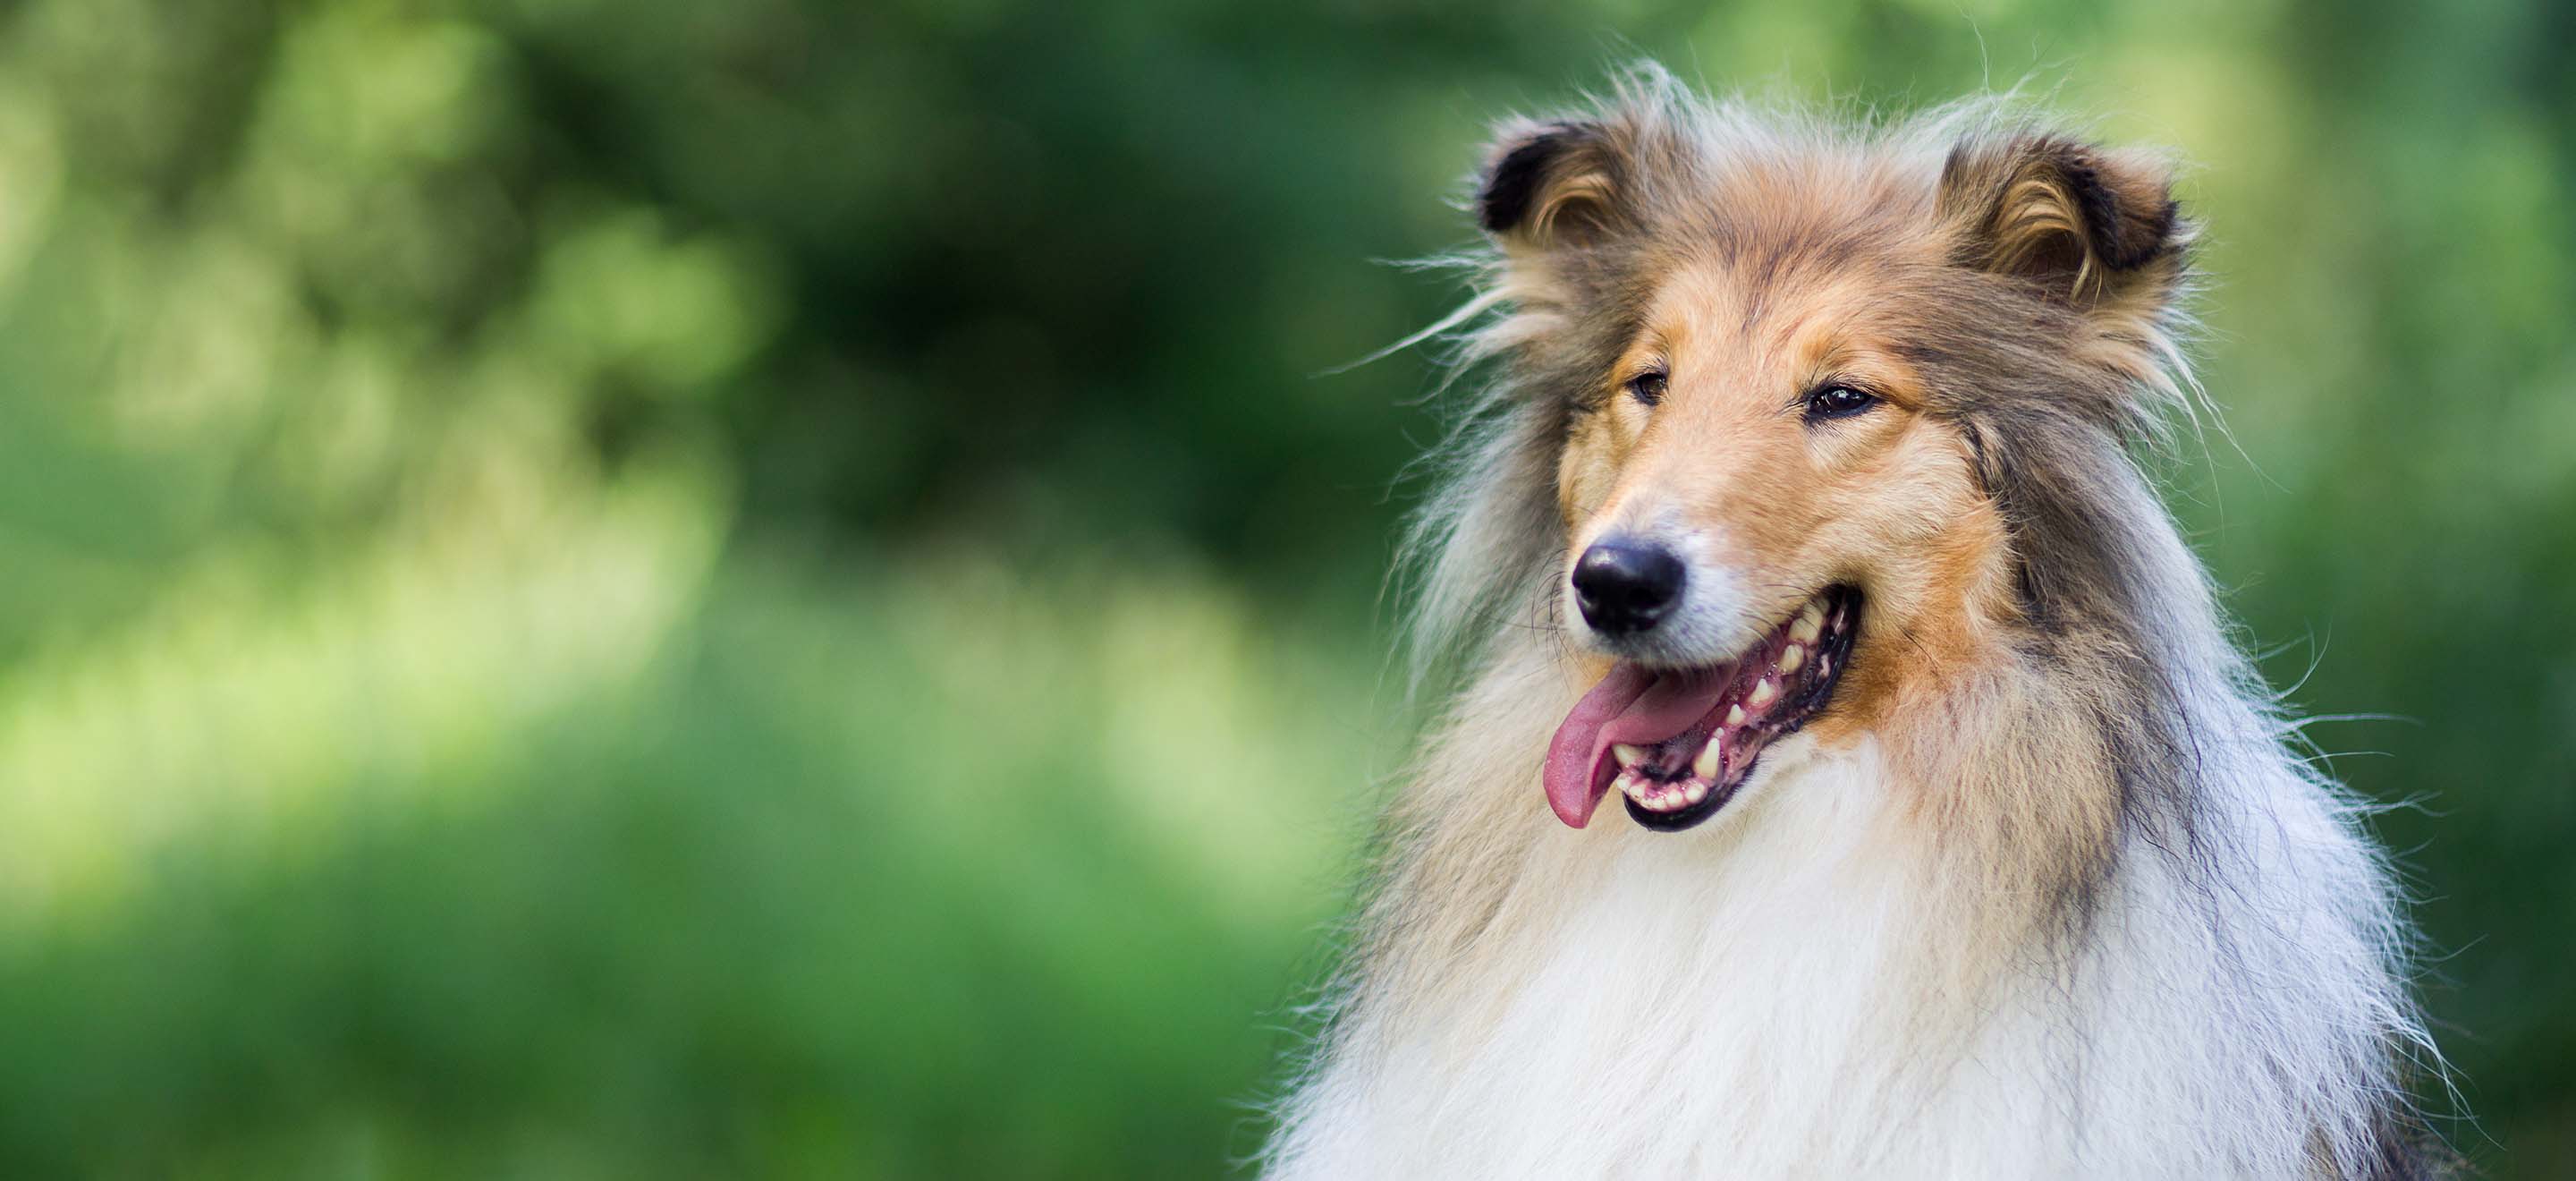 Collie dog smiling against a backdrop of greenery image